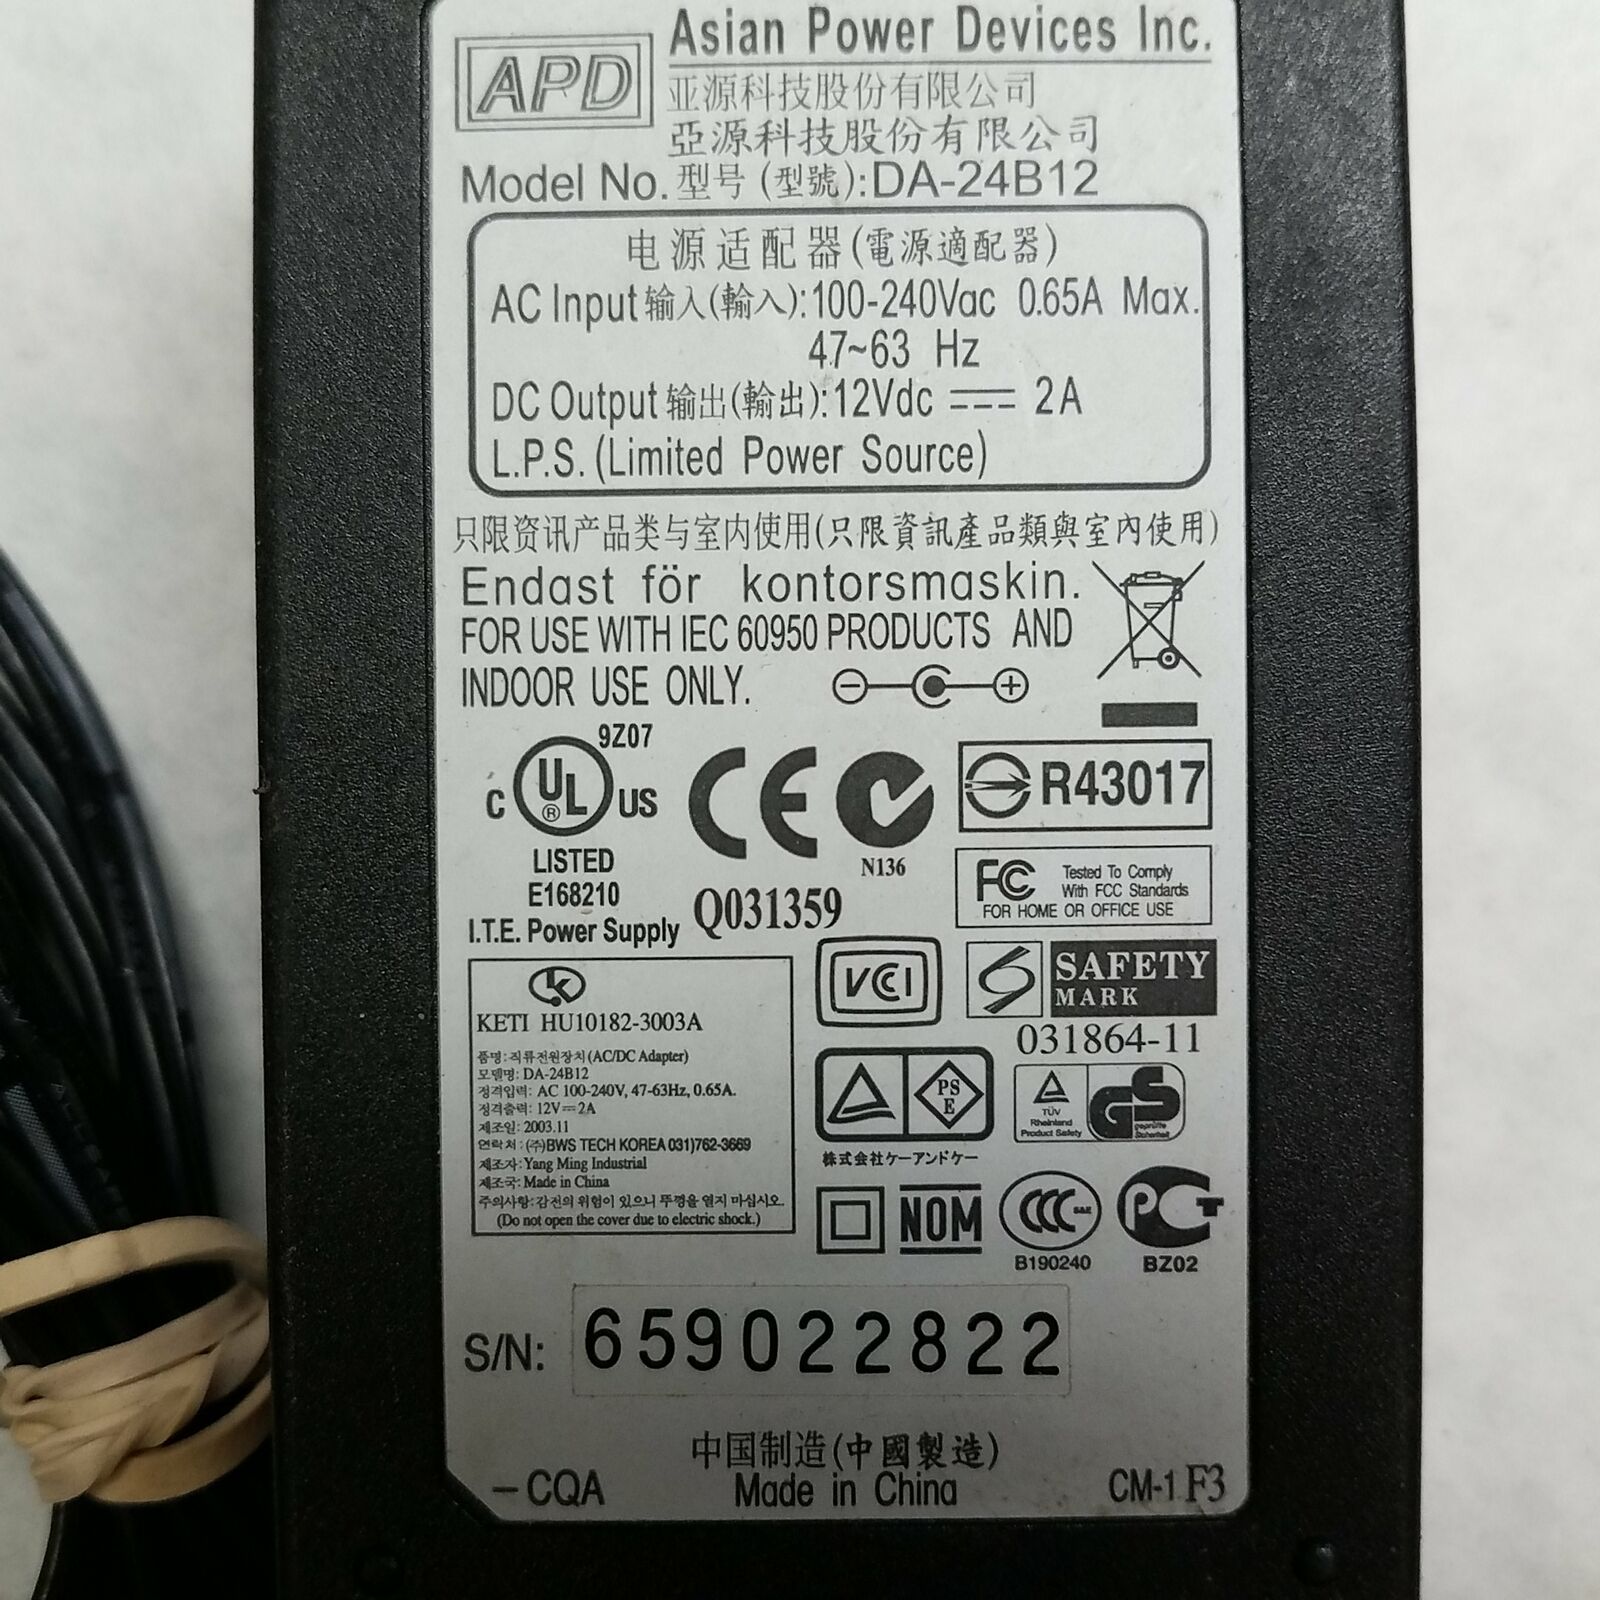 APD DA-24B12 Power Supply Adapter Charger 12VDC 2A Brand: Asian Power Devices Inc. Output Current: 2A Location: R